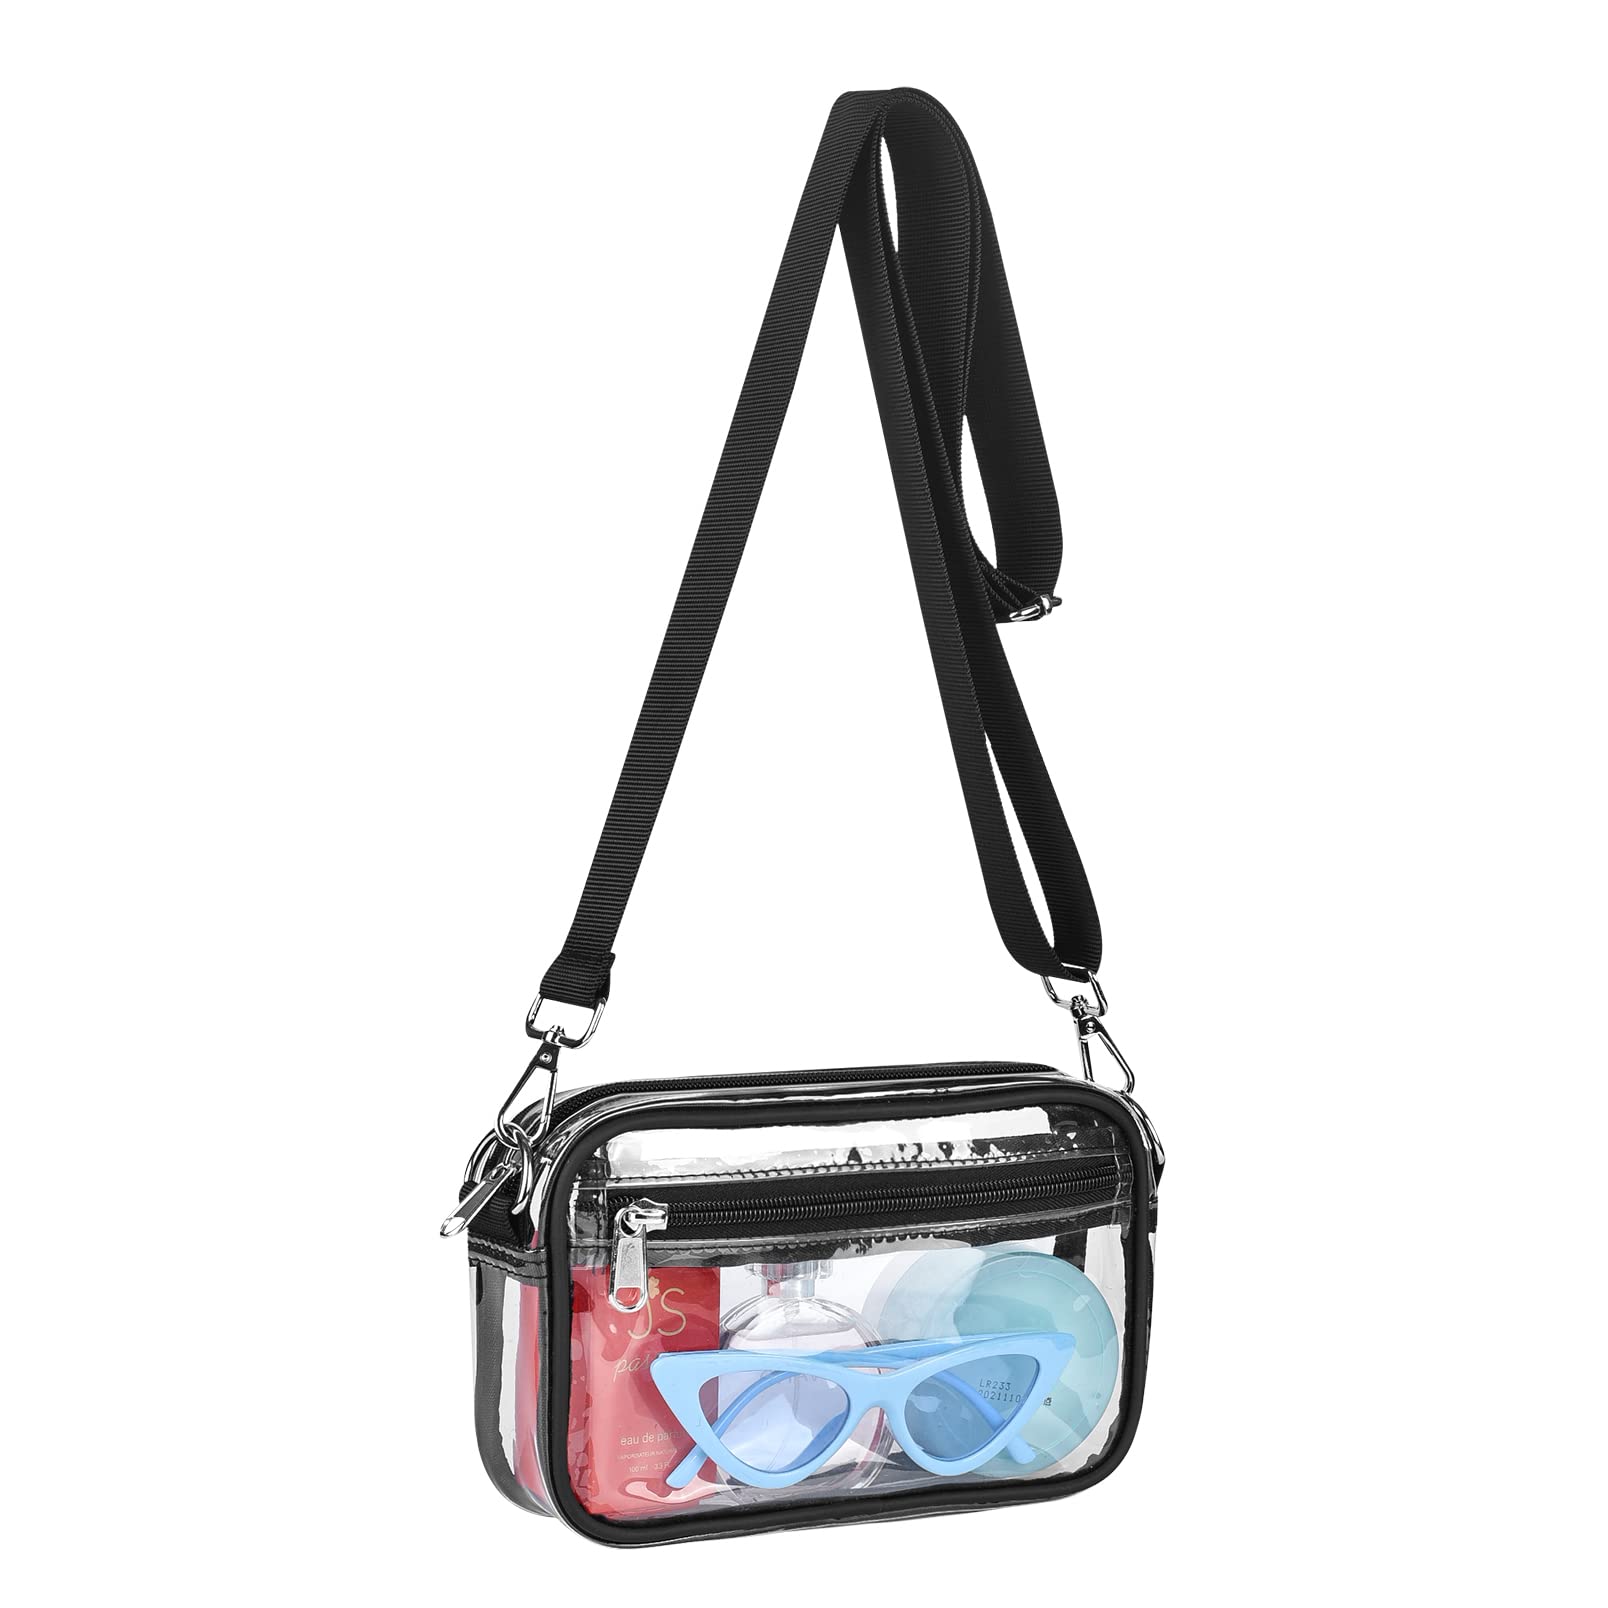 Clear Crossbody Messenger Shoulder Bag Clear Purse Stadium Approved  Suitable for Work, Travel, Workout, Concerts or